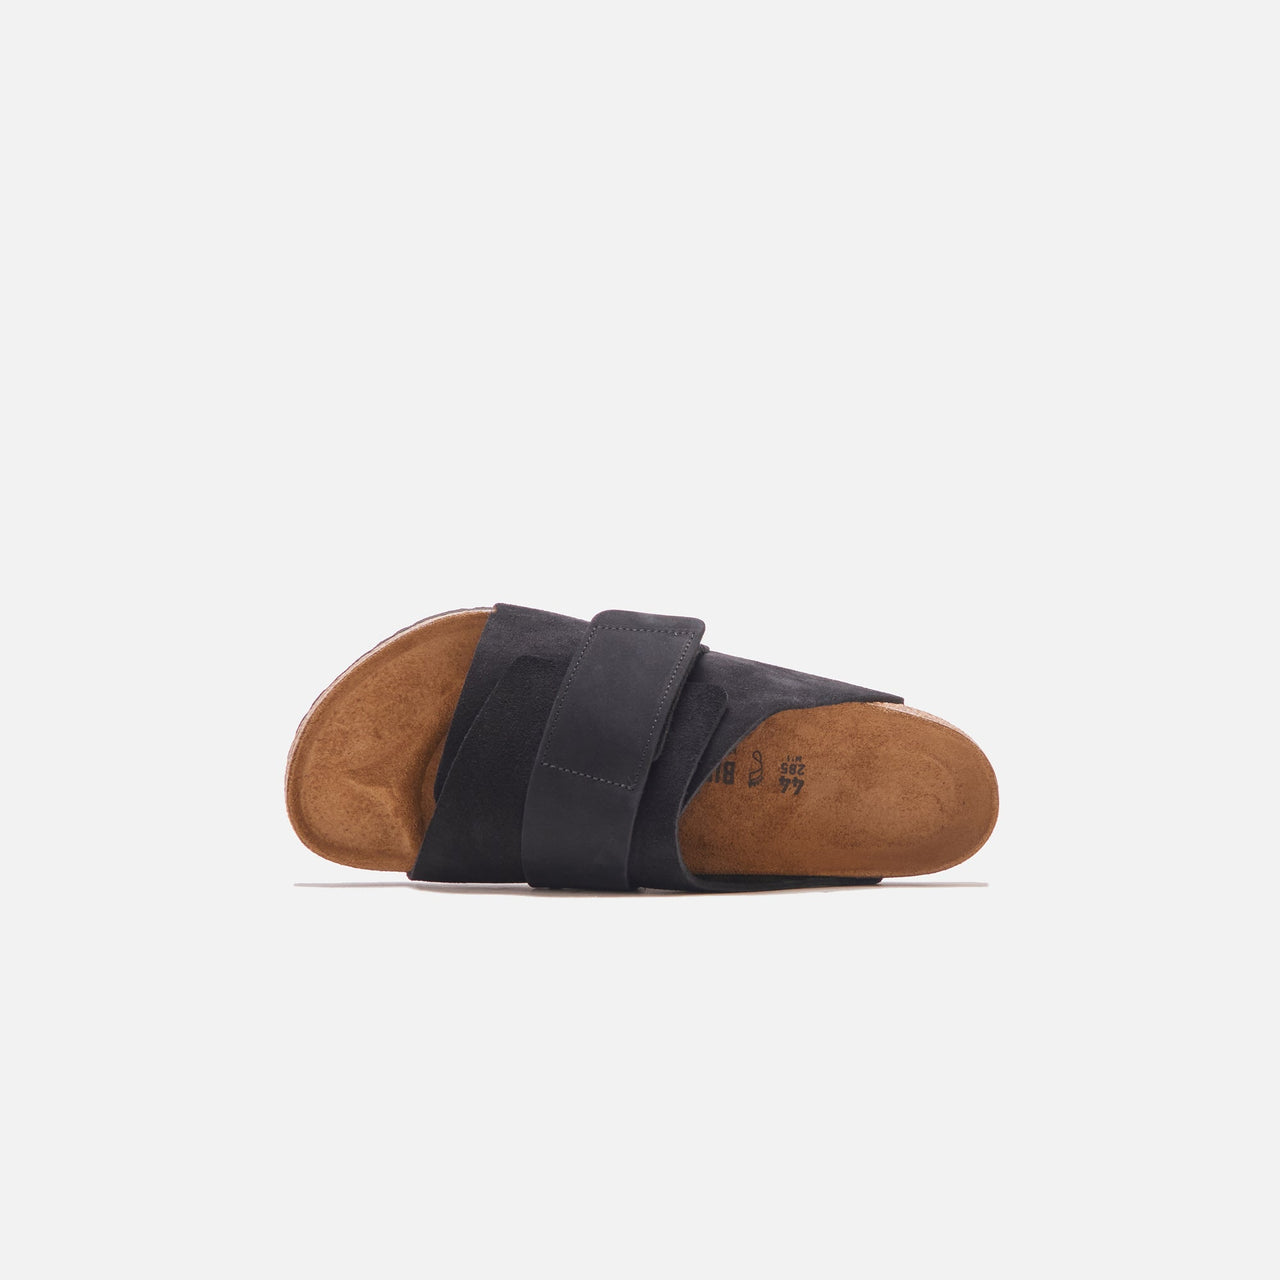 High-quality Birkenstock Kyoto Suede Black sandal with durable rubber sole